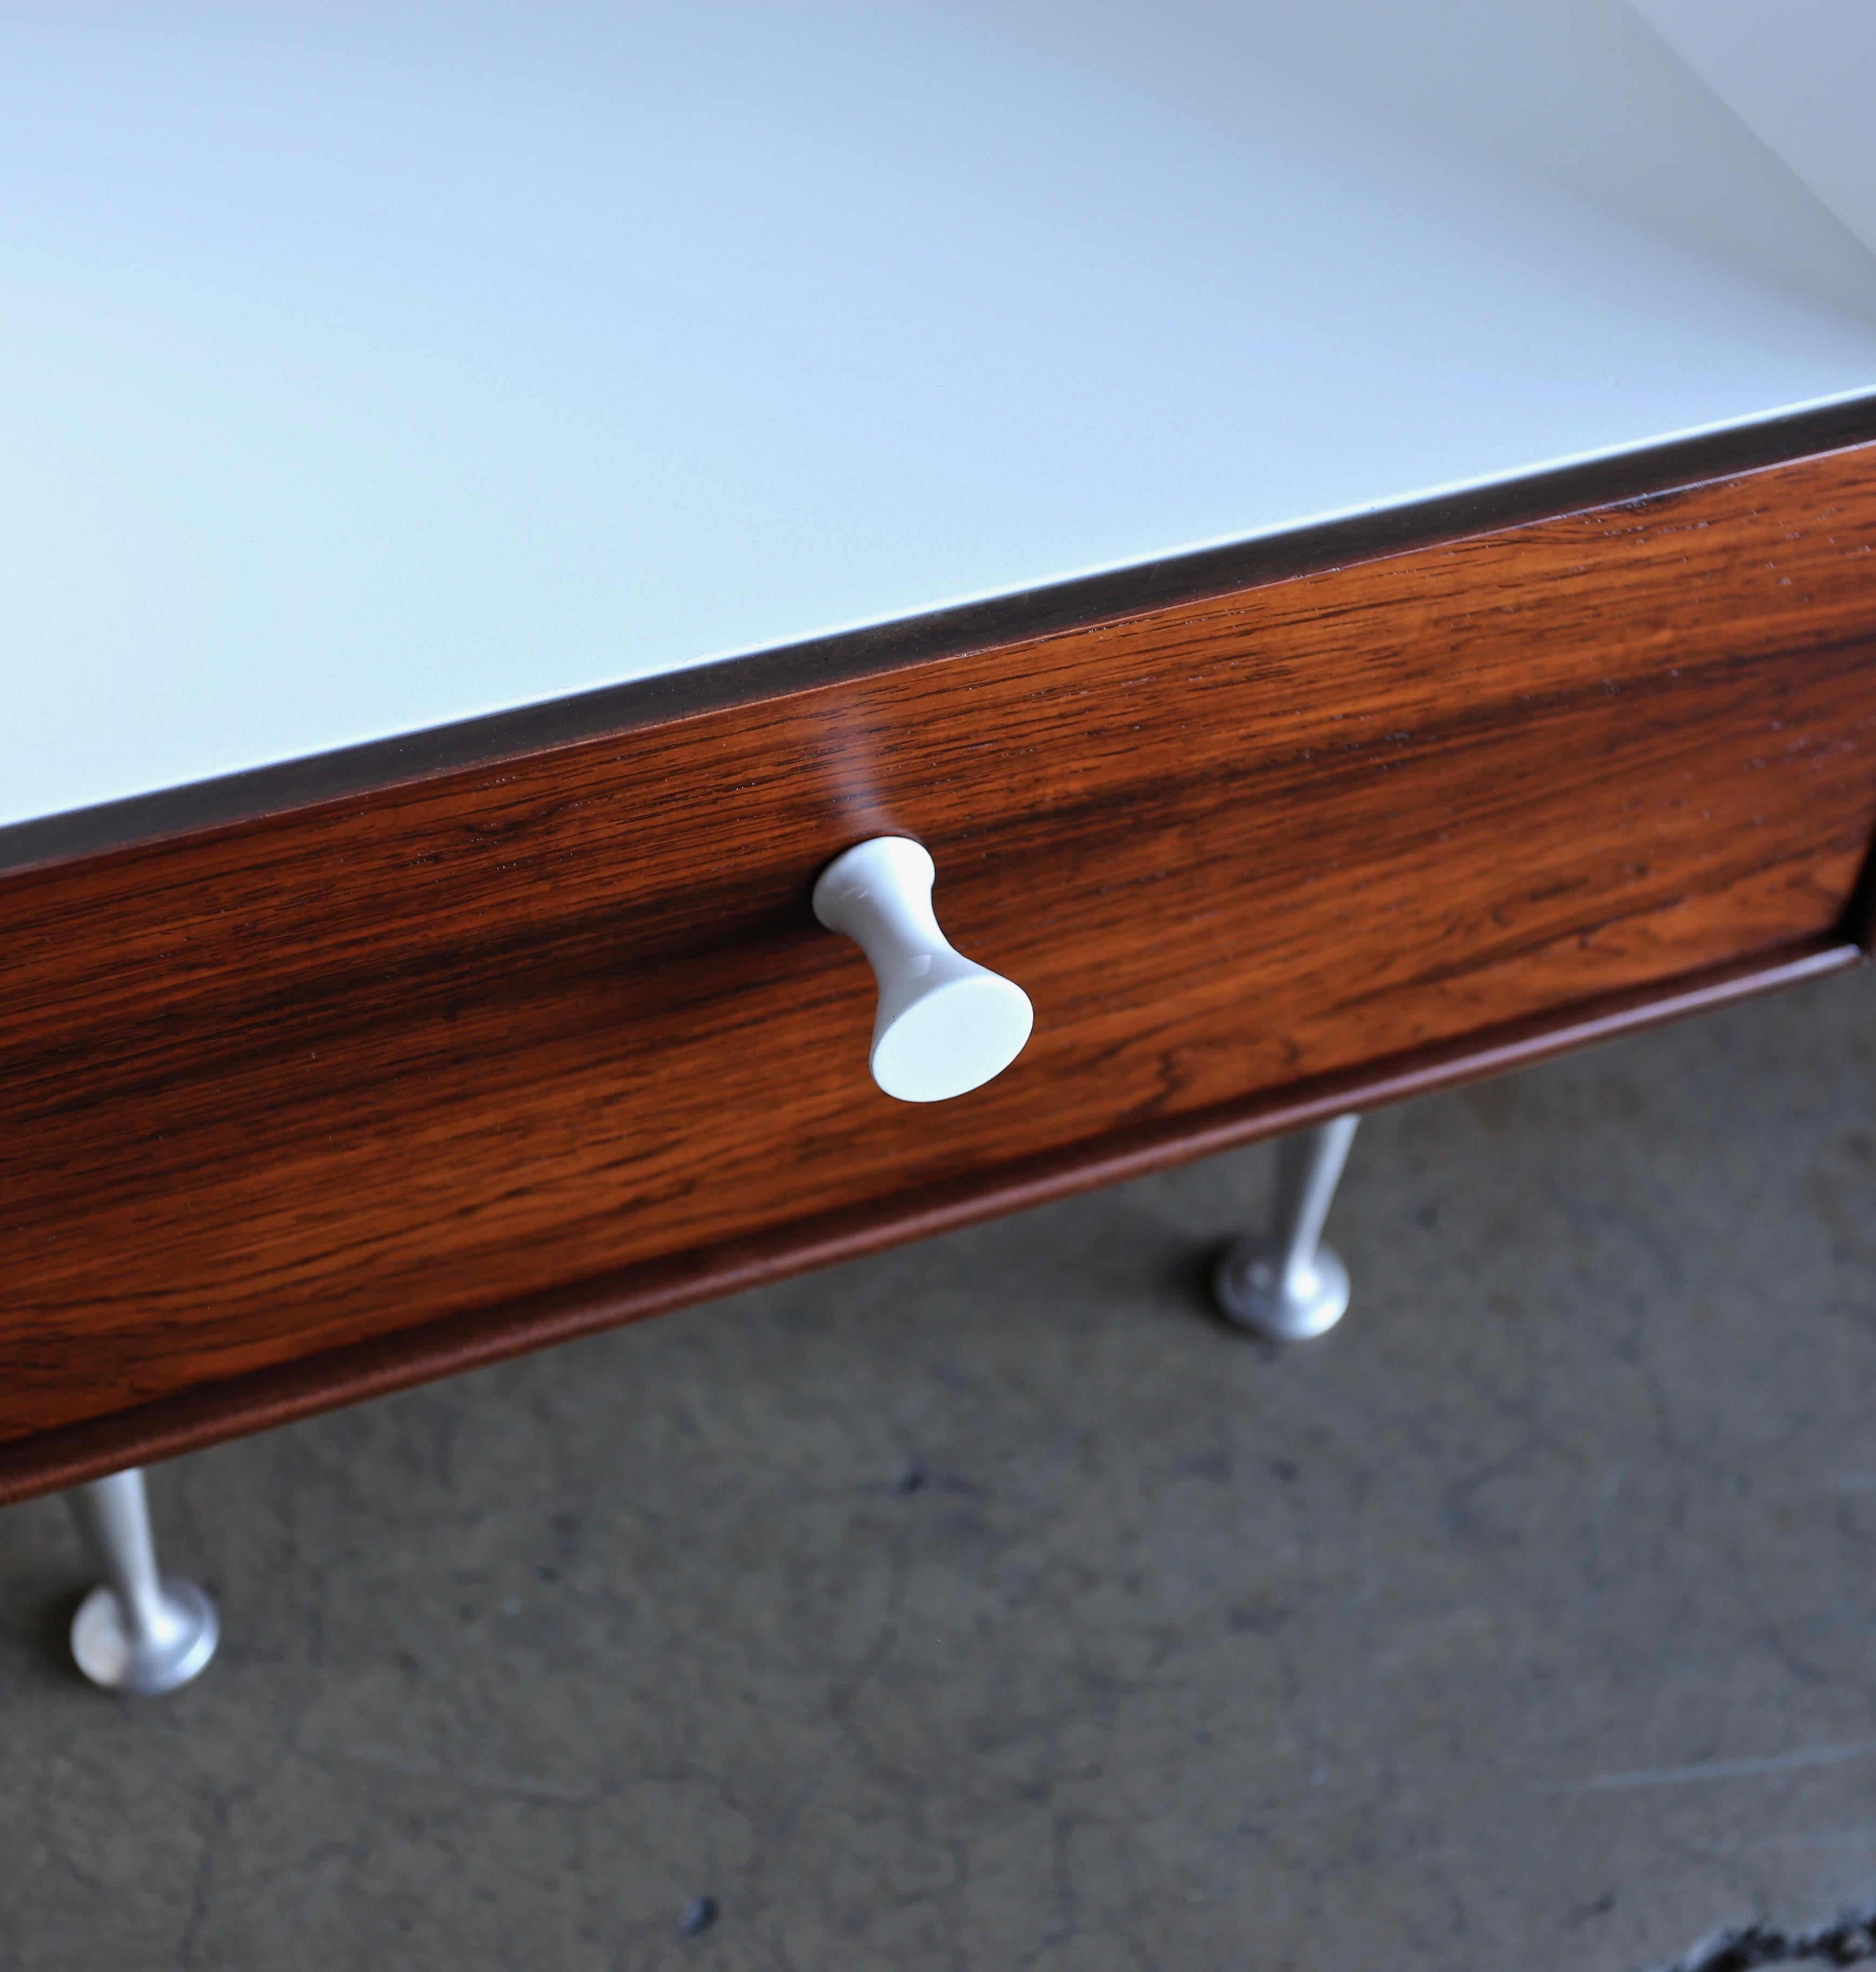 Lacquered George Nelson Thin Edge Rosewood Nightstands for Herman Miller, circa 1952